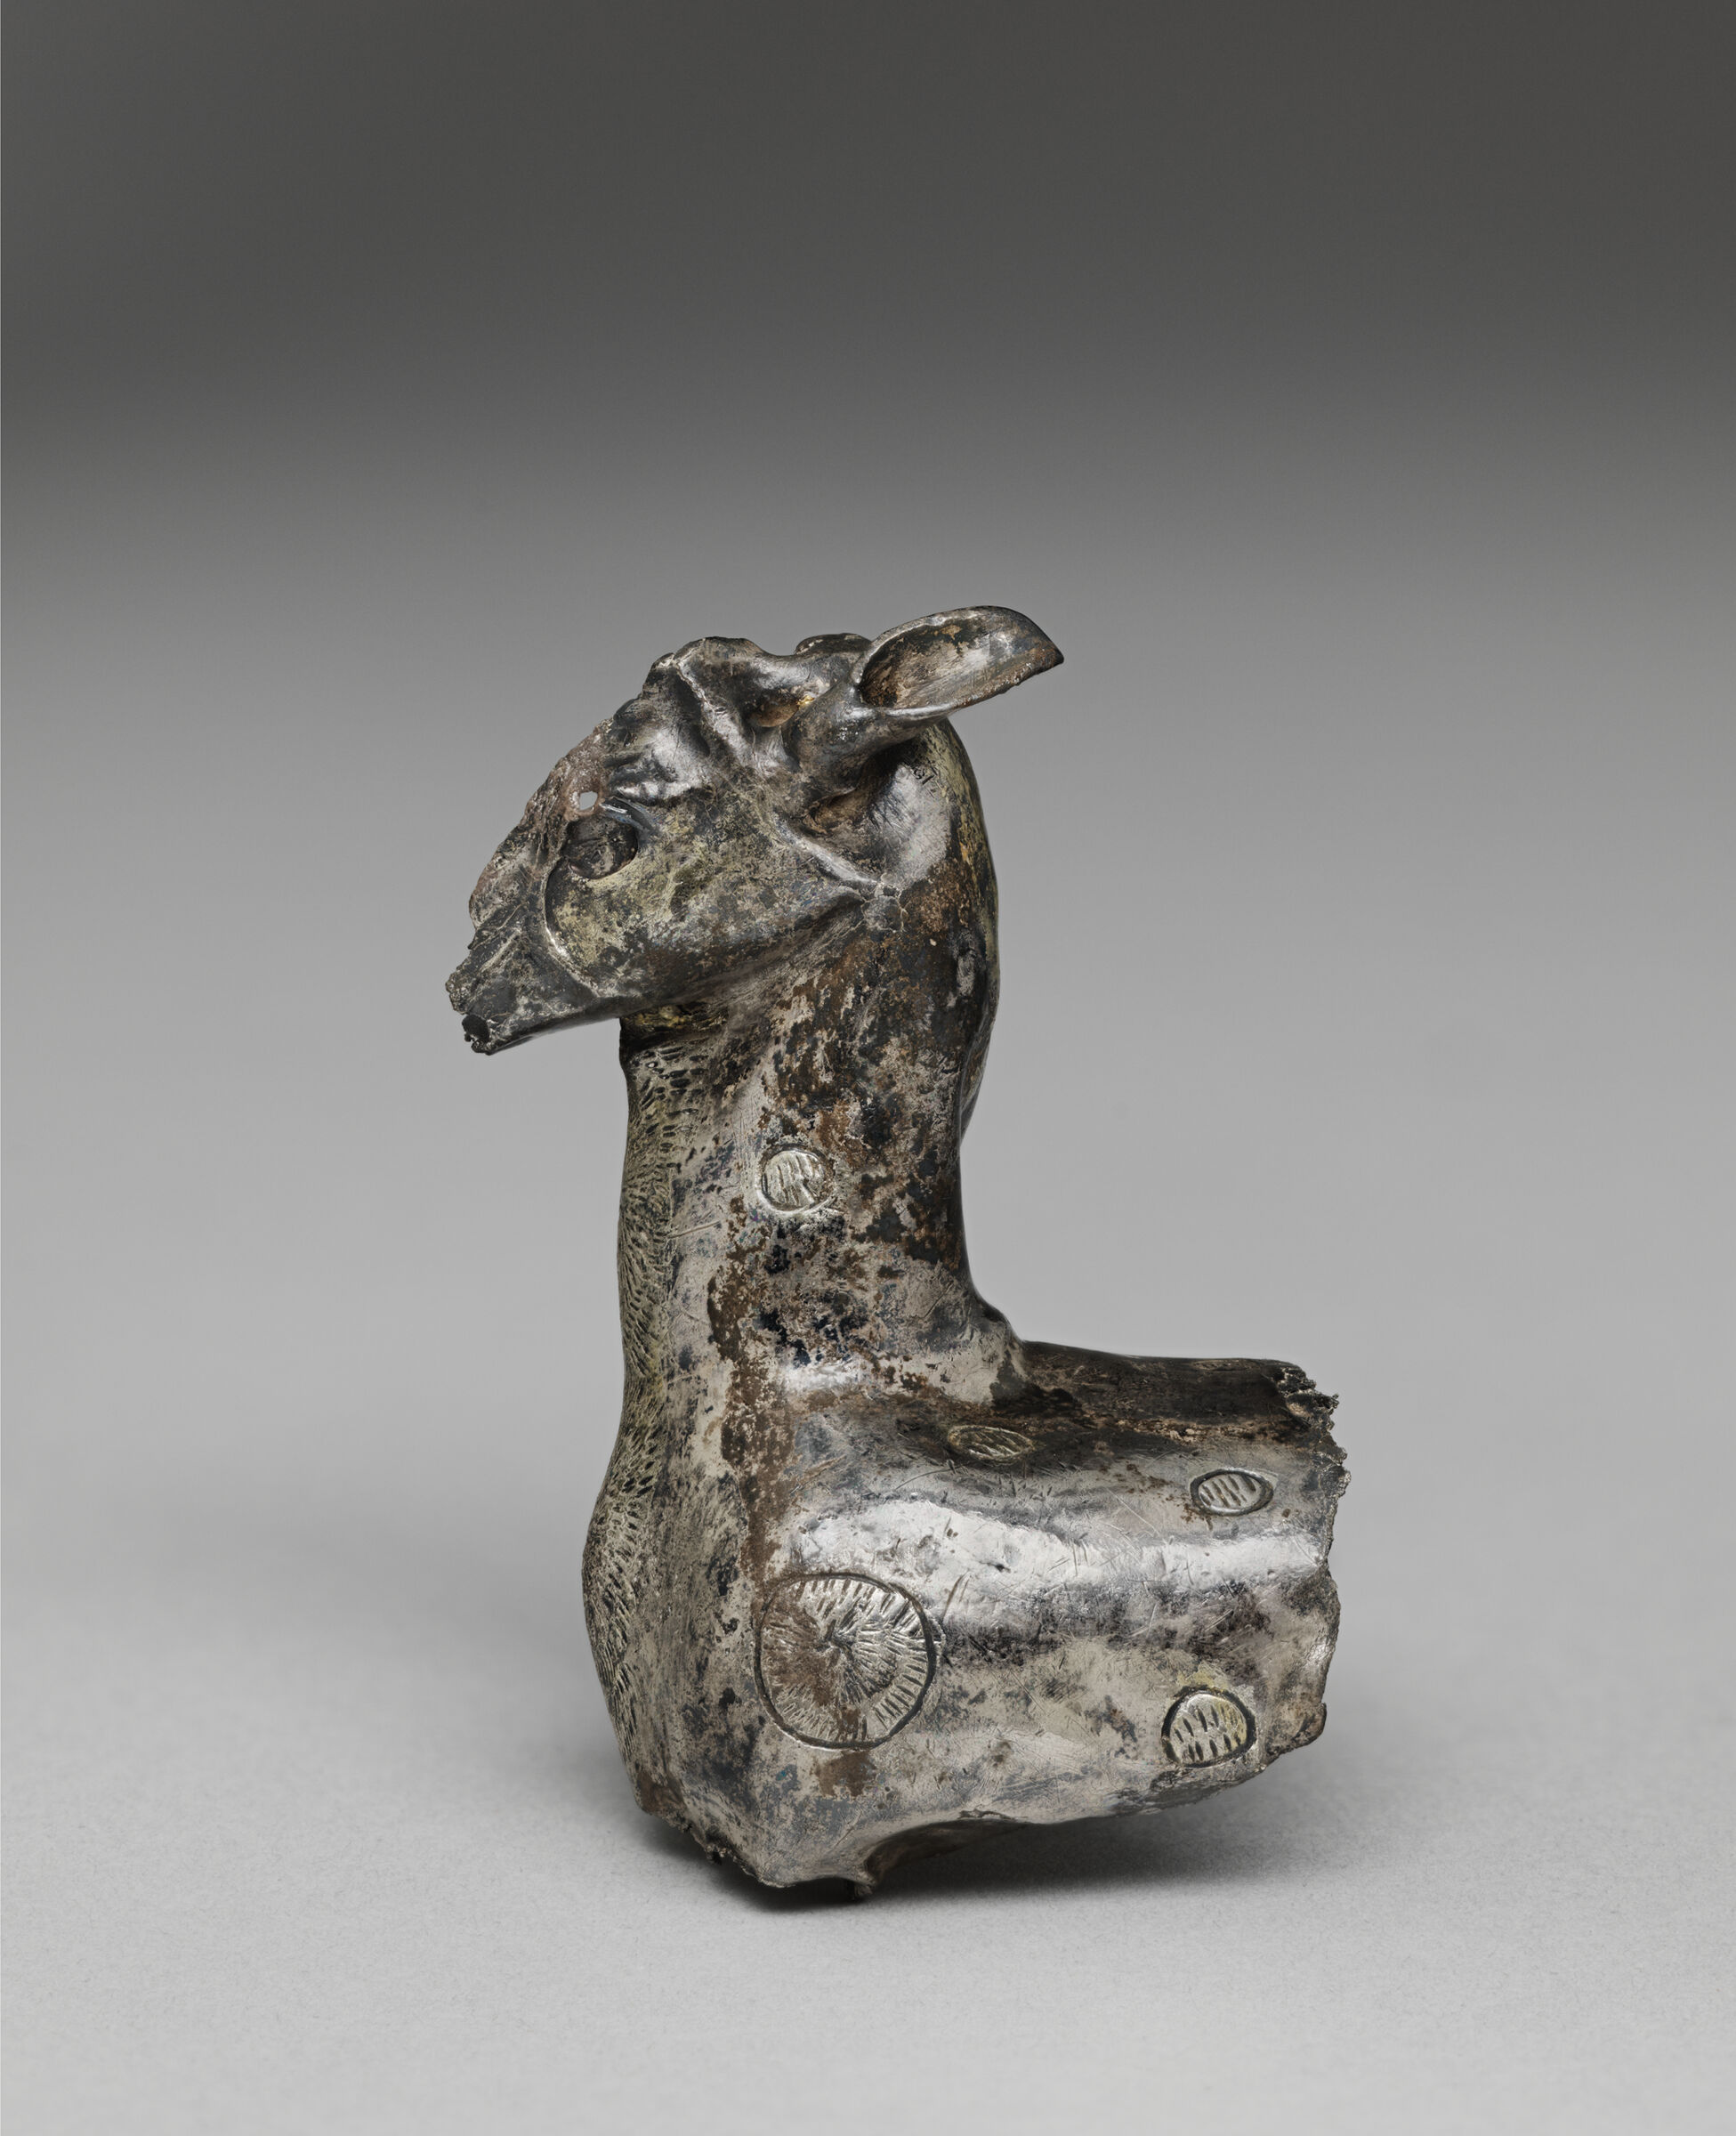 Fragmentary Forepart Of A Deer, Perhaps From A Rhyton